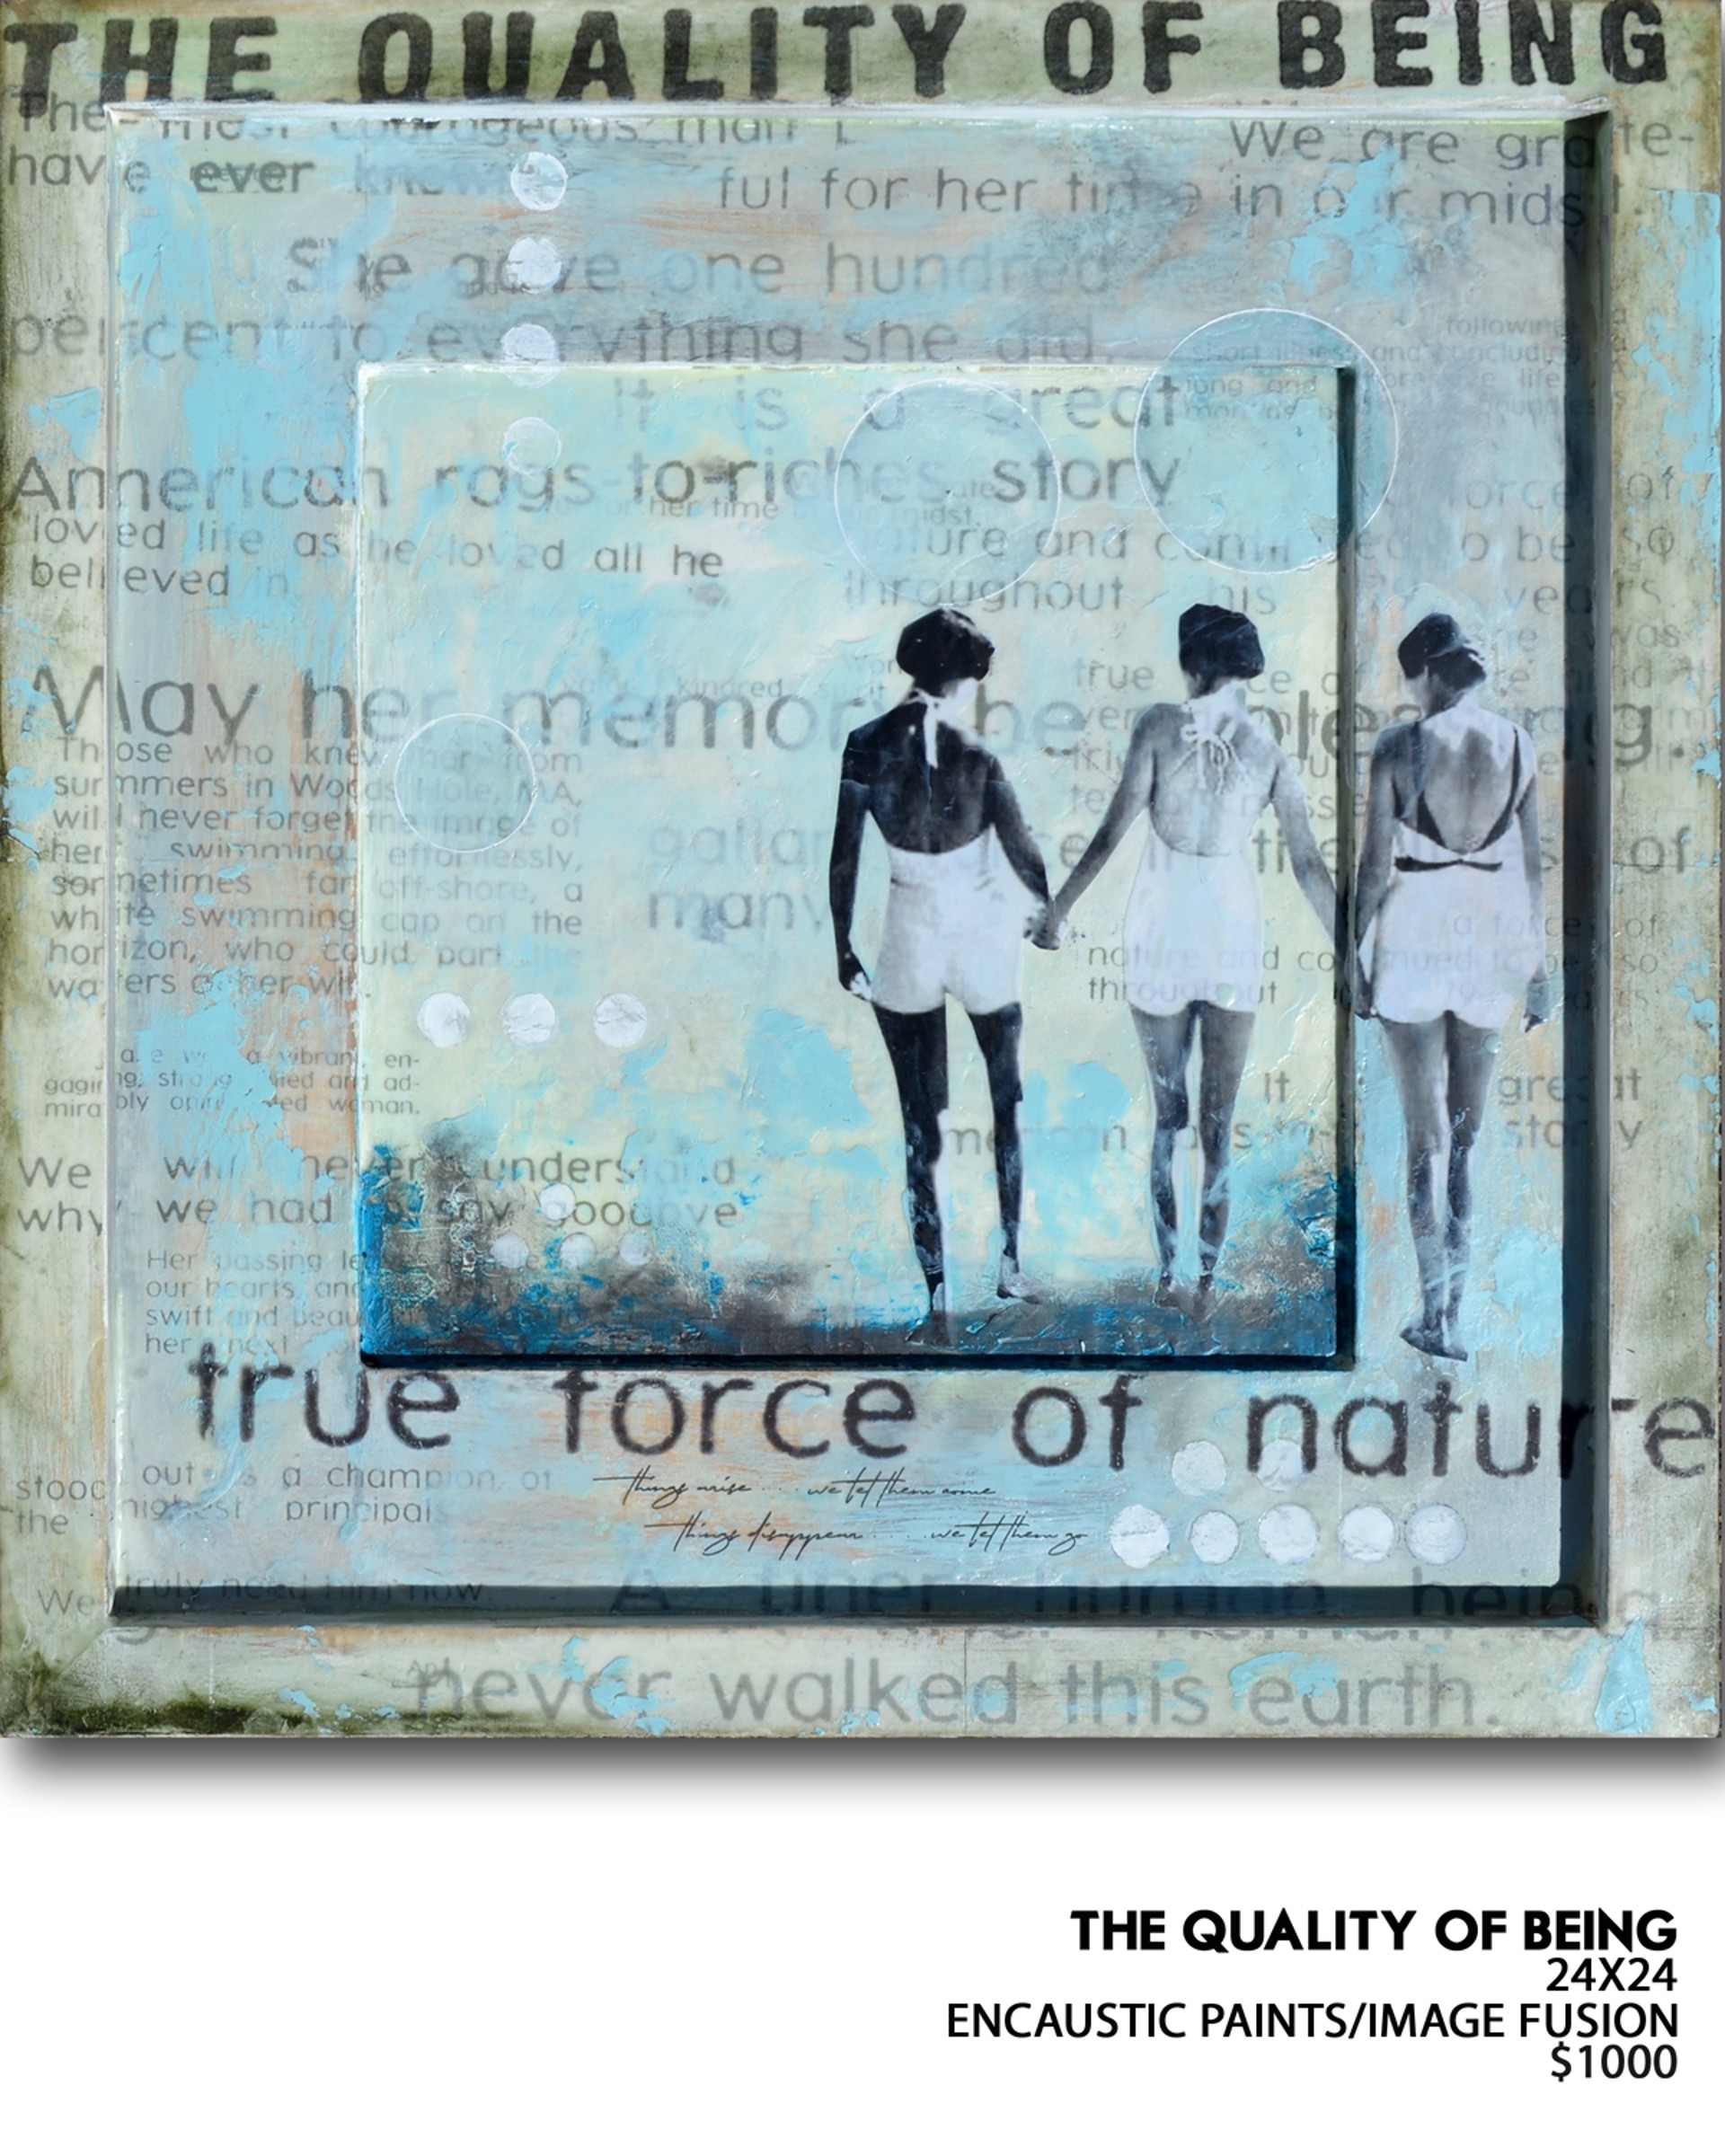 The quality of Being by Ruth Crowe